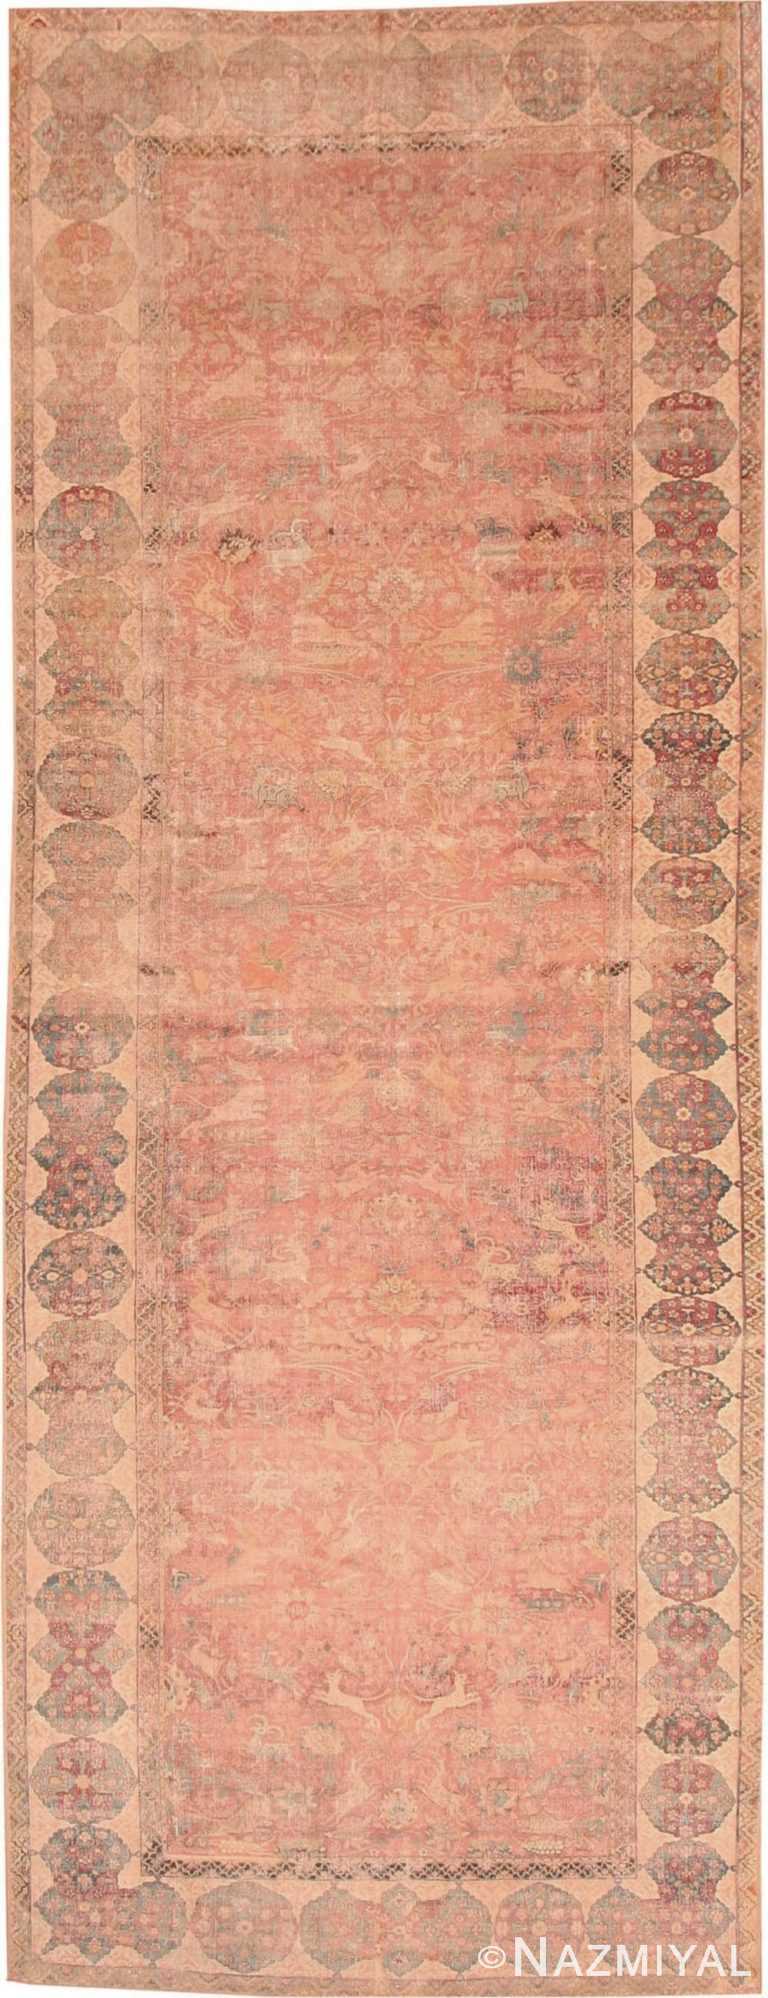 Antique Gallery Size 17th Century Isfahan Persian Rug #3338 by Nazmiyal Antique Rugs